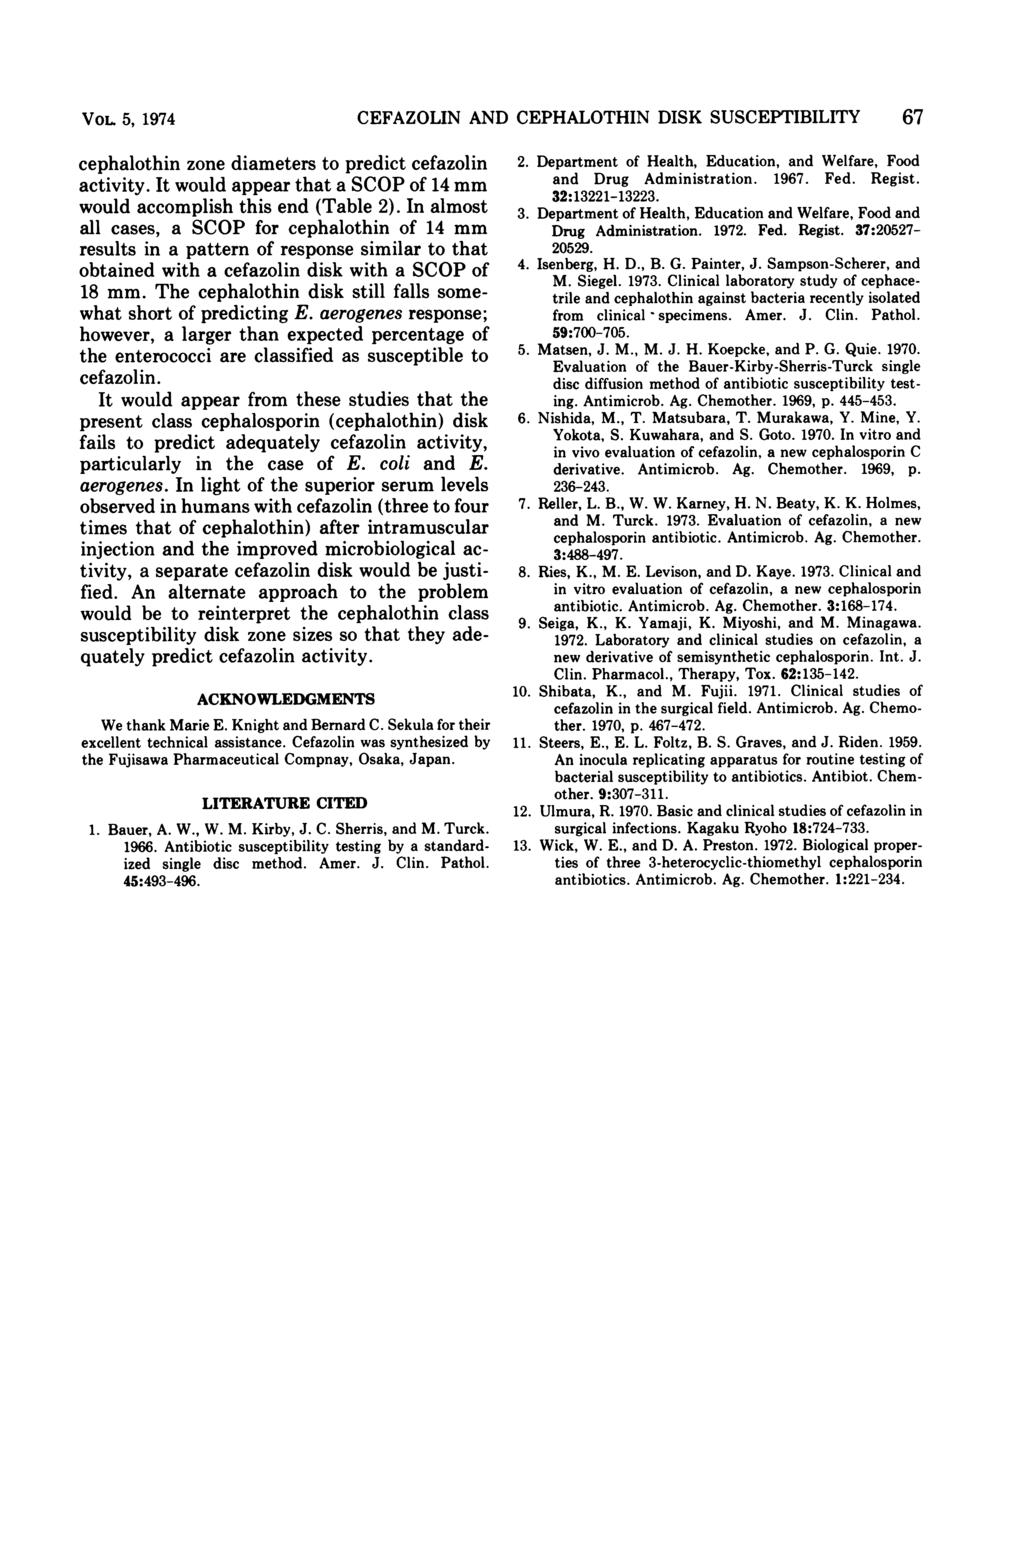 VOL 5, 1974 CEFAZOLIN AND CEPHALOTHIN DISK SUSCEPTIBILITY 67 cephalothin zone diameters to predict cefazolin activity. It would appear that a SCOP of 14 mm would accomplish this end (Table 2).